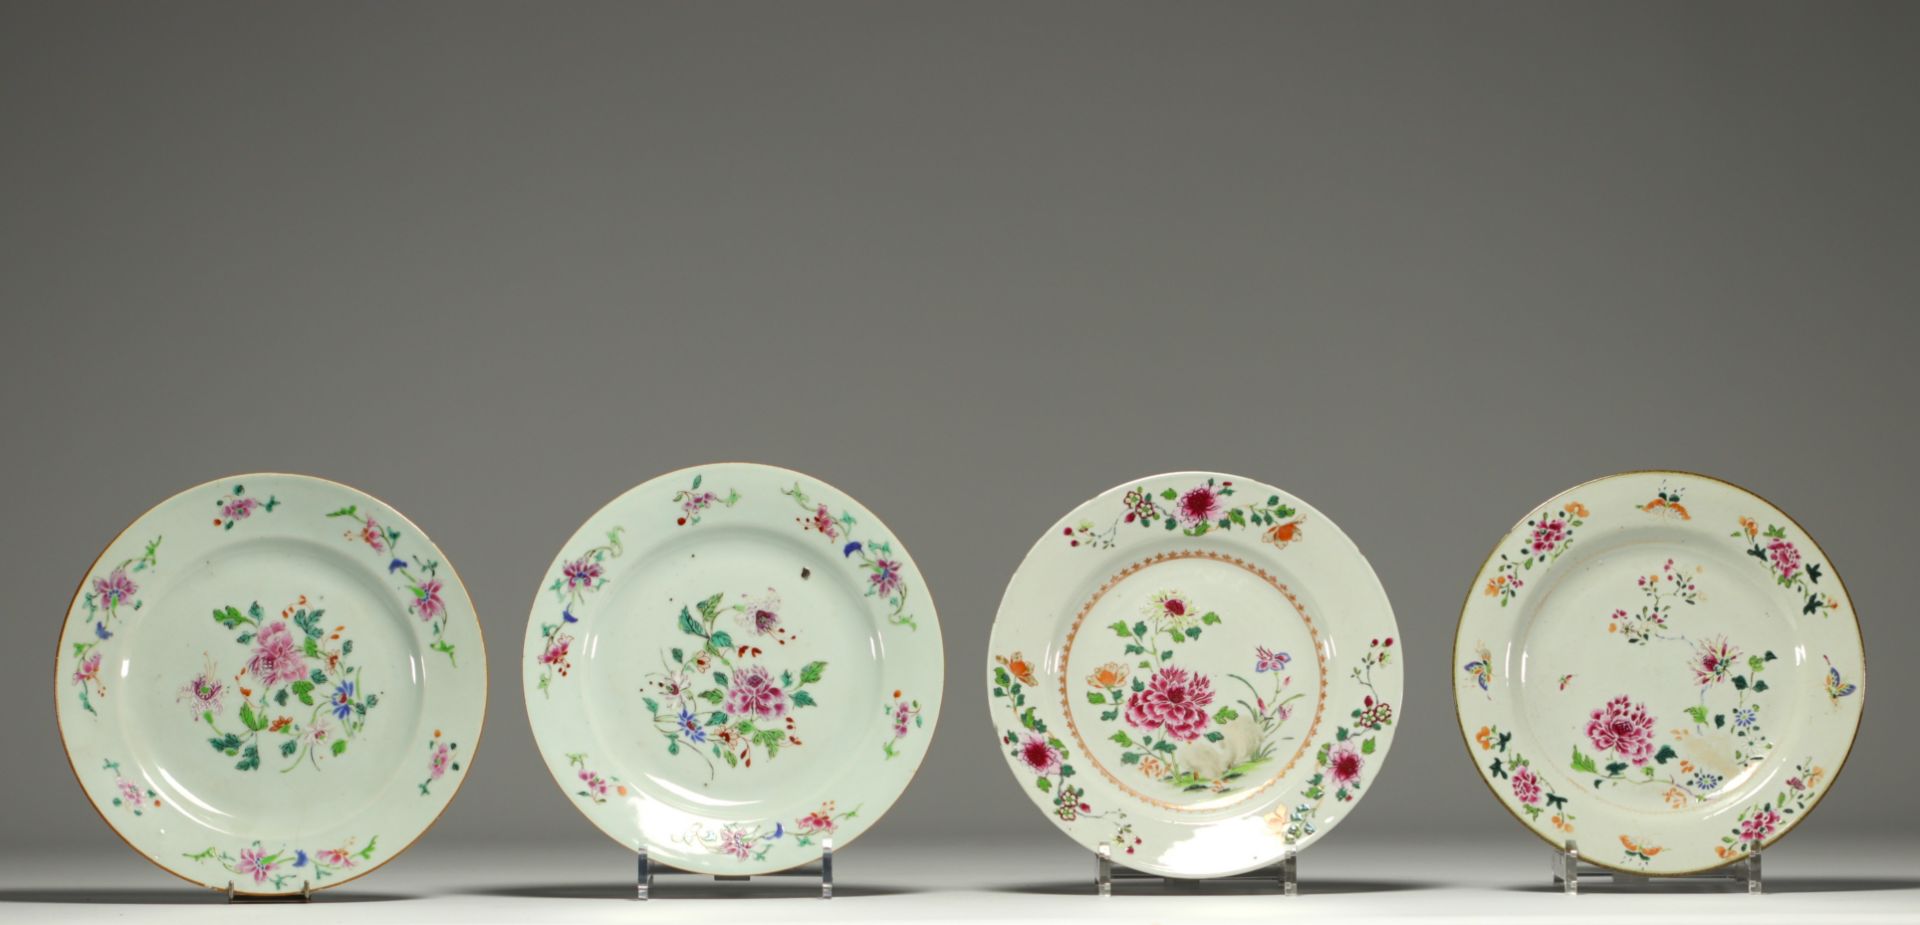 China - Set of four Famille Rose porcelain plates decorated with flowers.